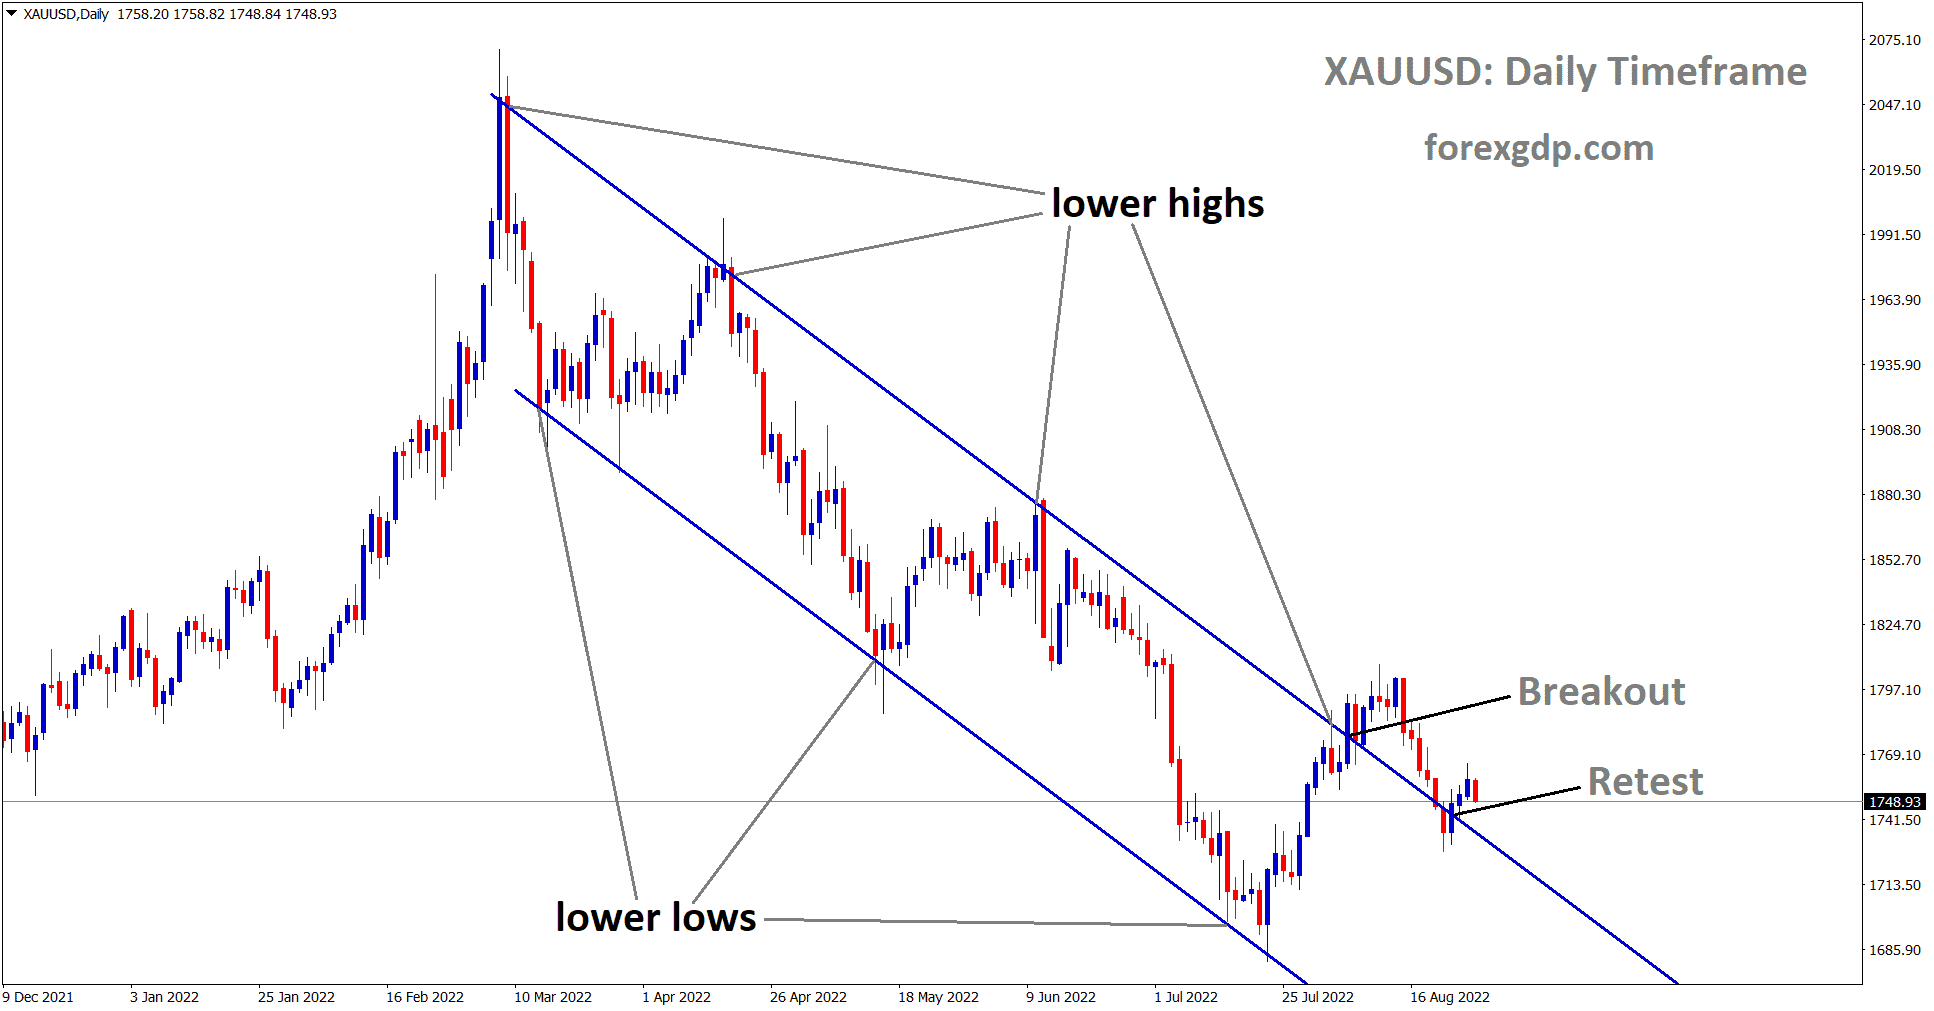 XAUUSD is moving in the Descending channel and the market has retesting the Broken area of the Descending channel